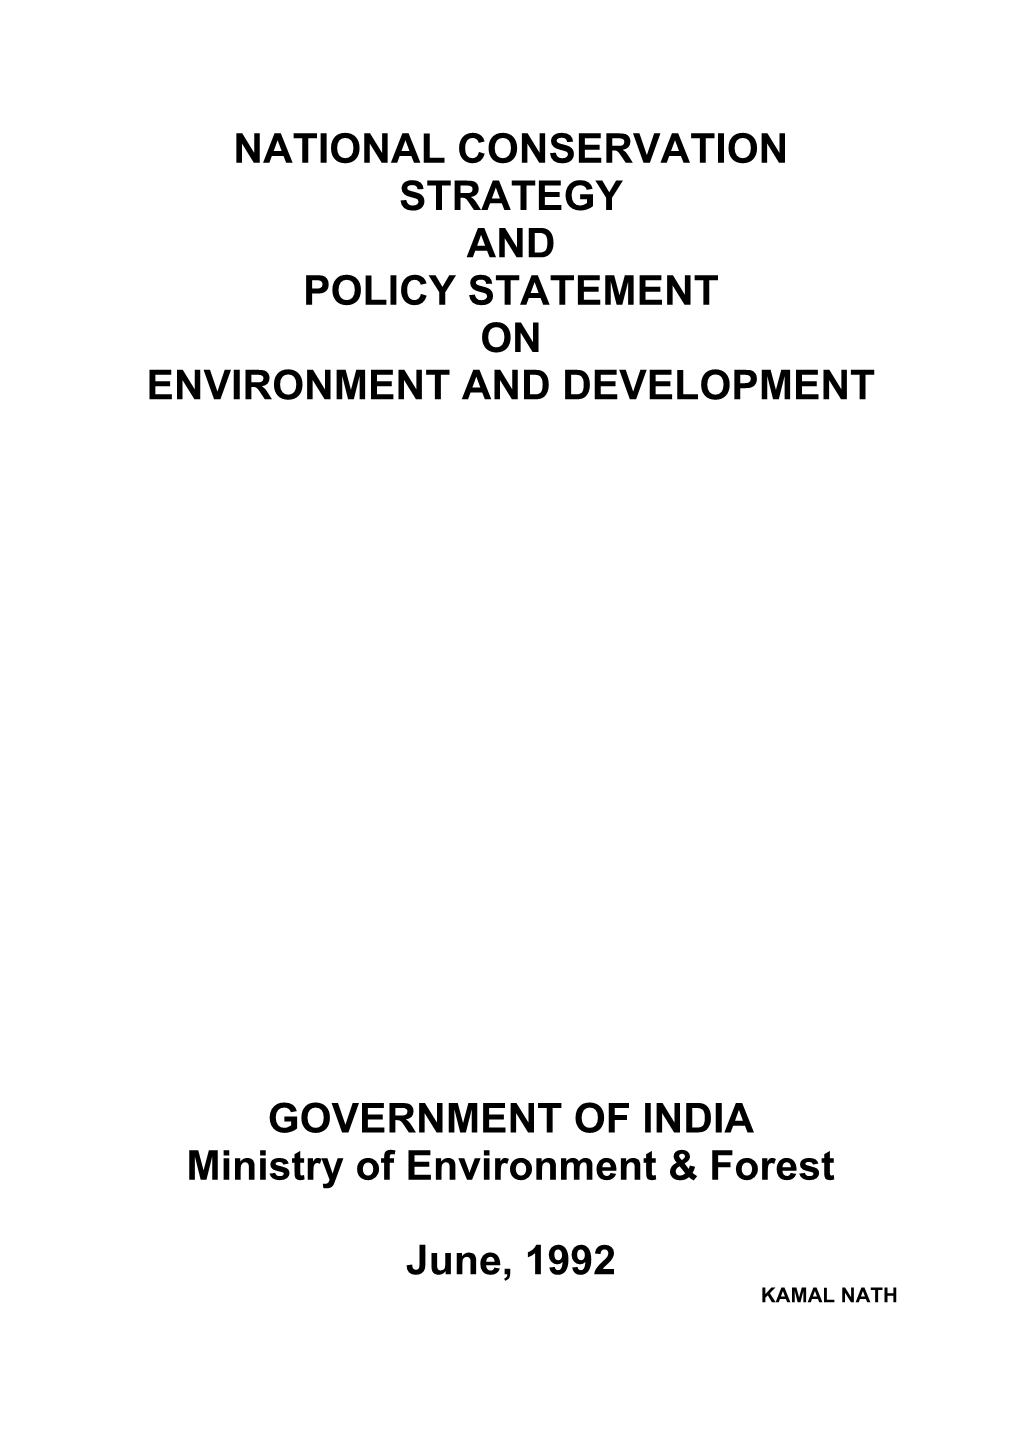 National Conservation Strategy